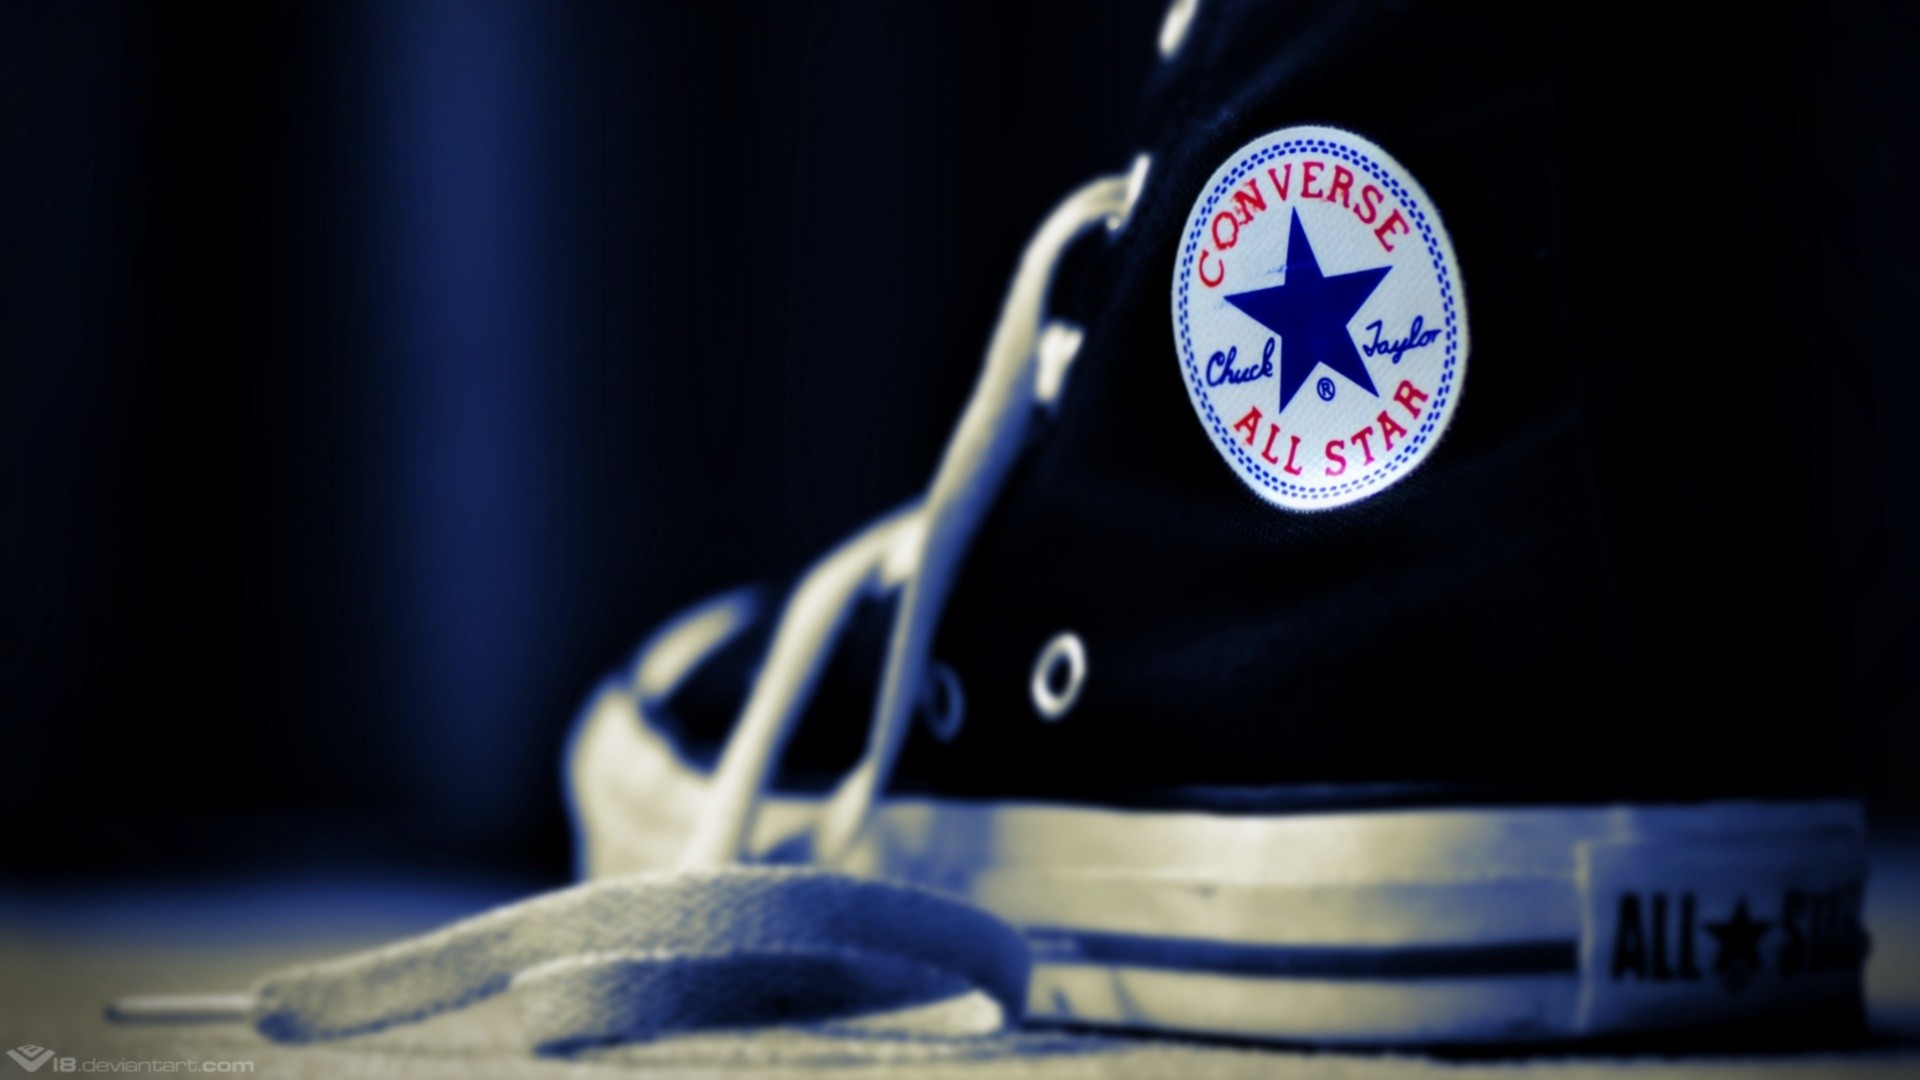 Shoes Converse All Star 1920x1080